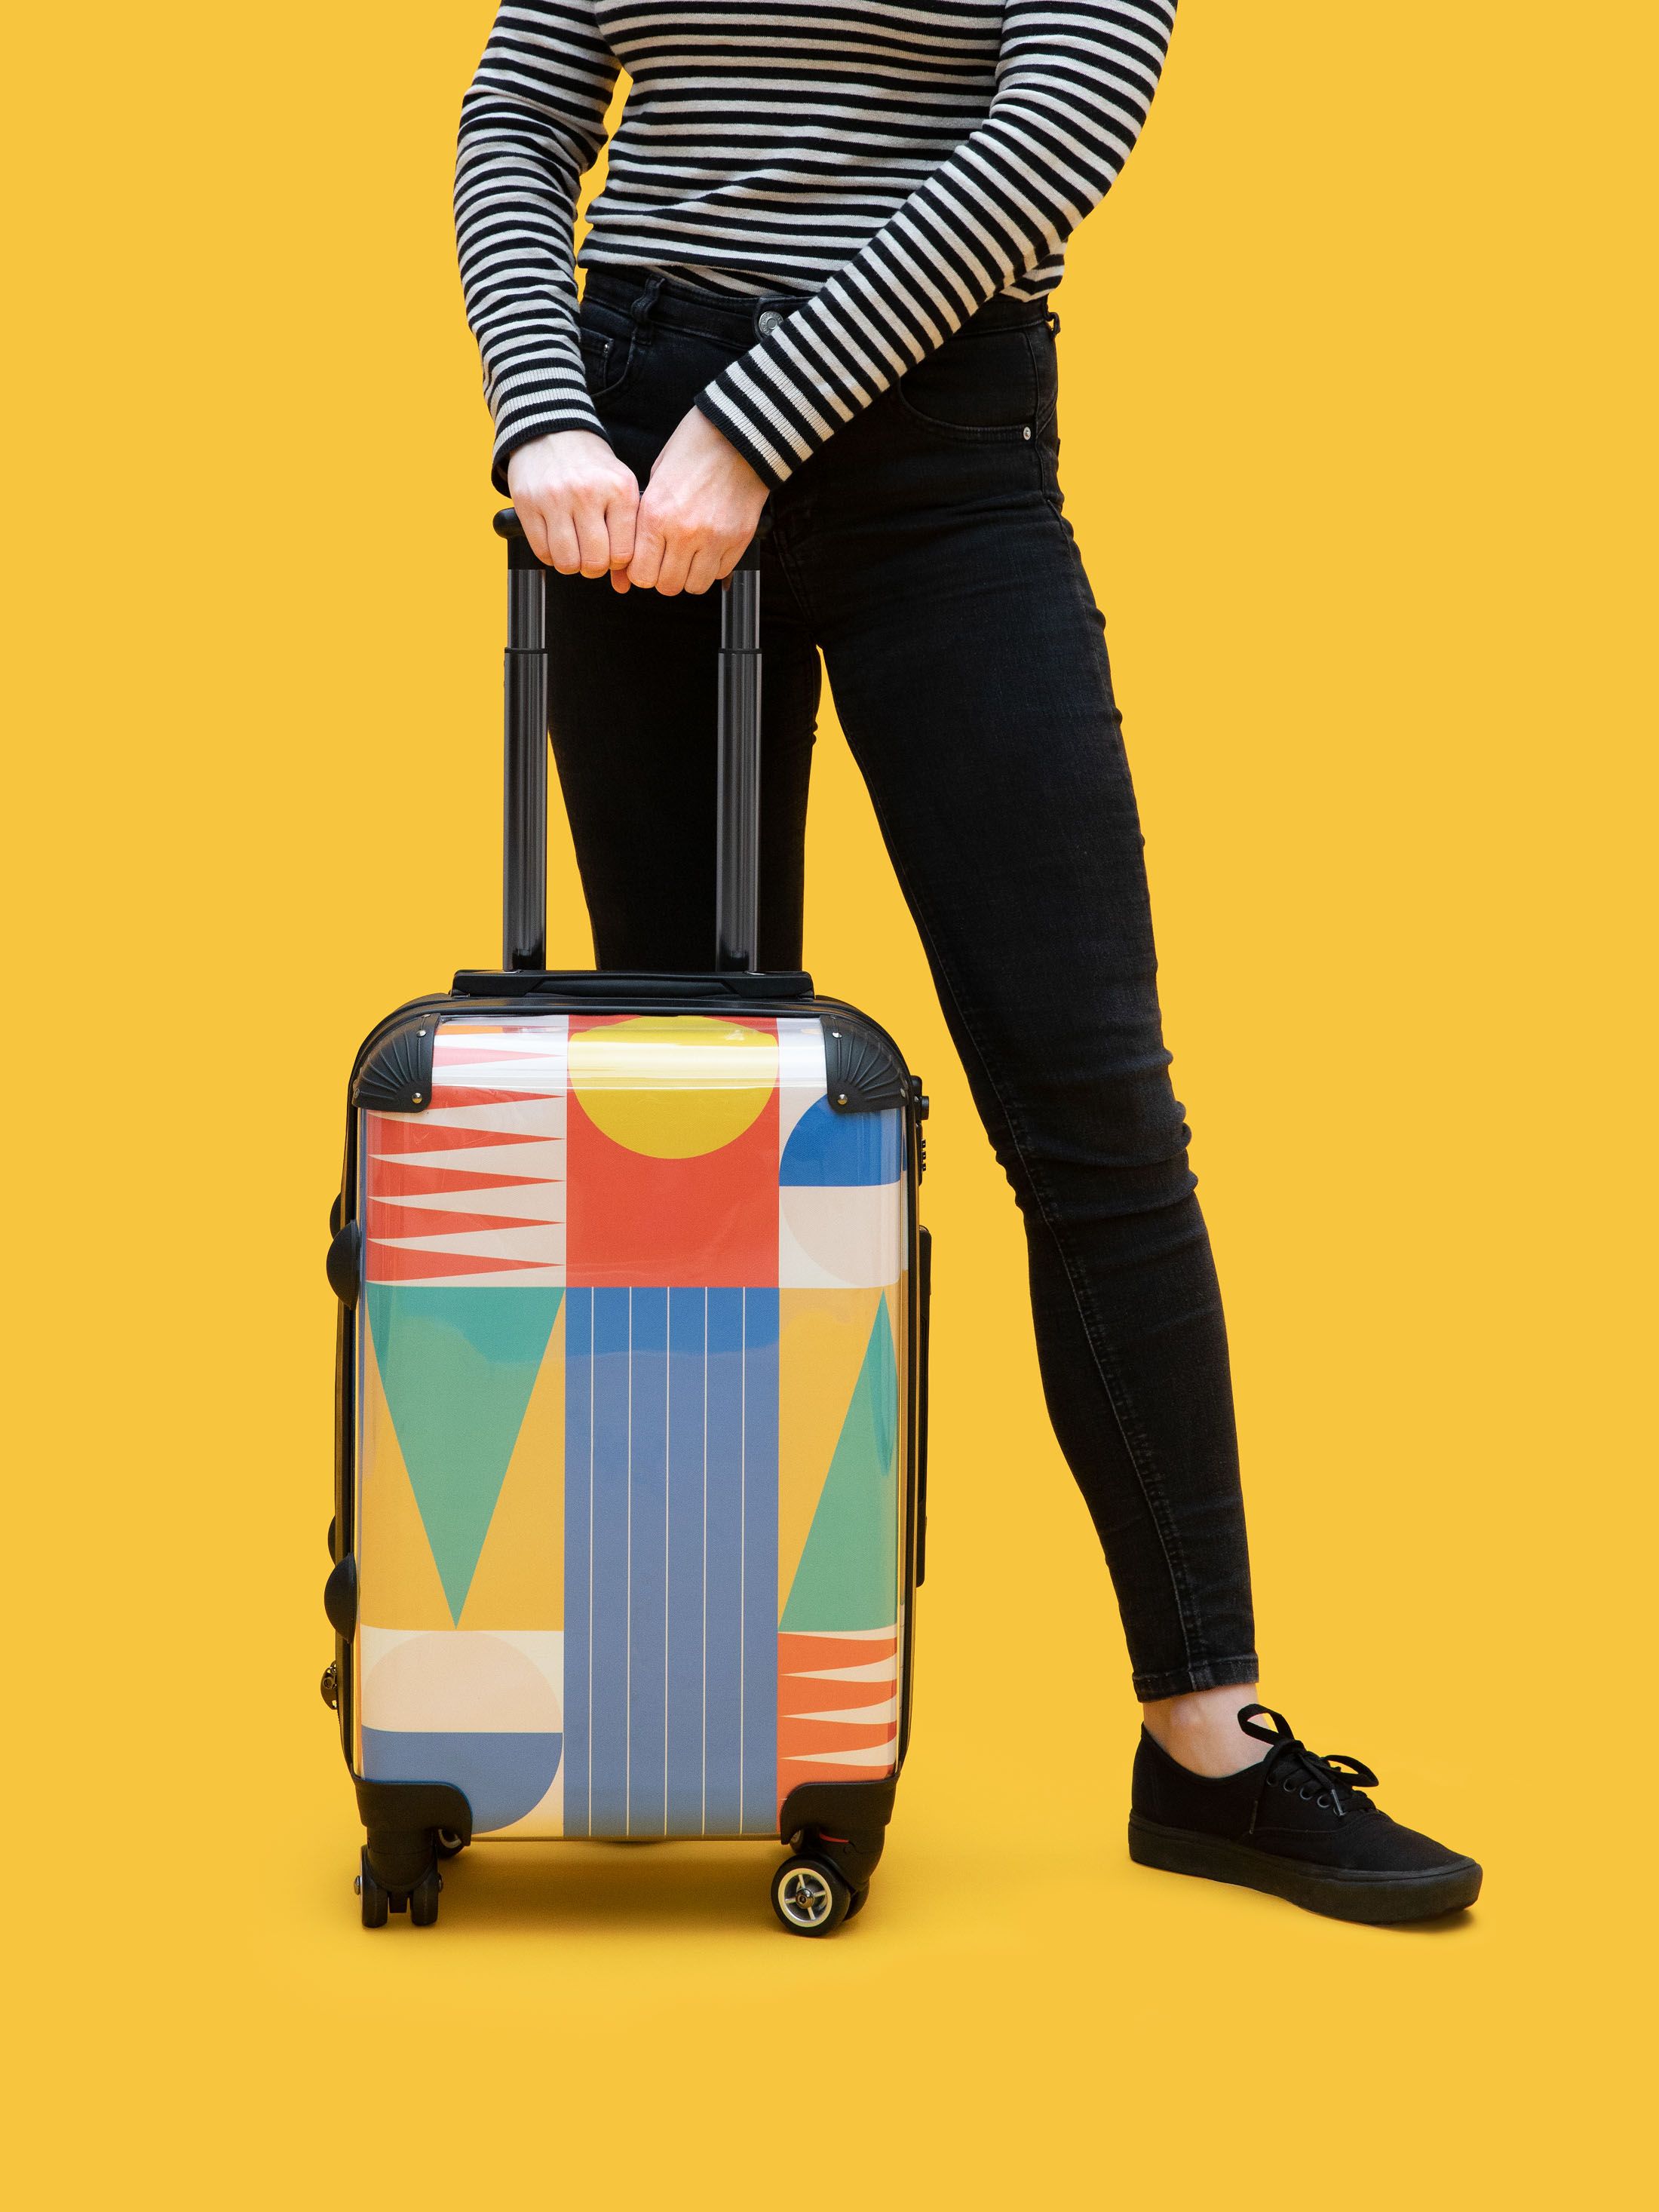 Custom Suitcase. Design Your Own Suitcase UK For Work/Travel